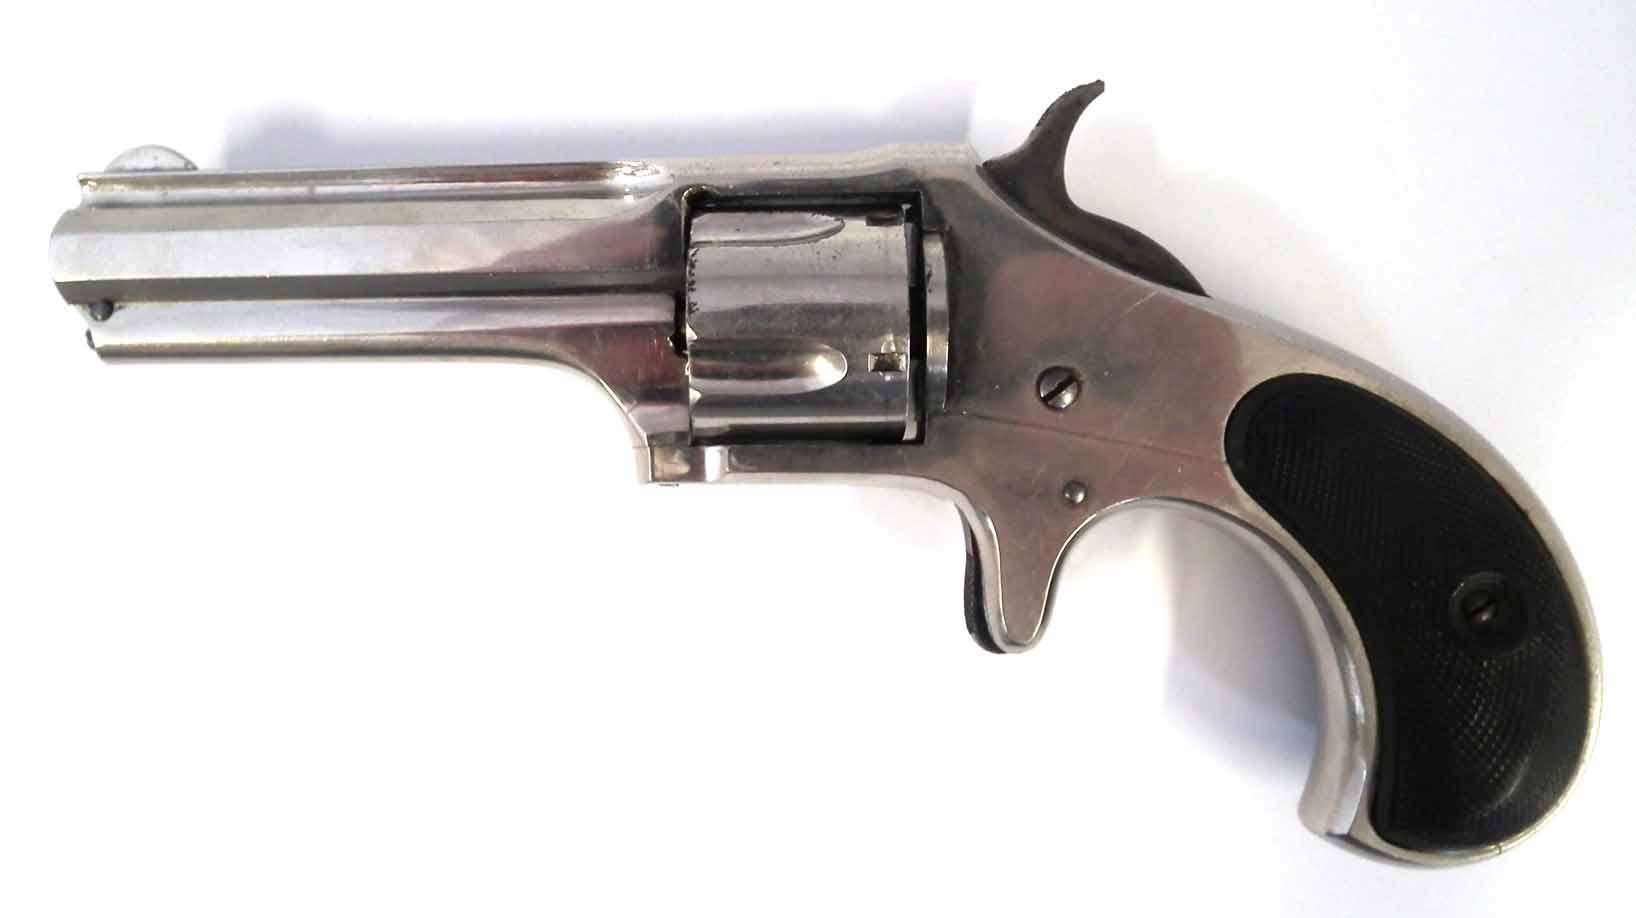 Remington Smoot single action revolver, with nickel plated body, colour case hardened hammer, and - Image 6 of 8